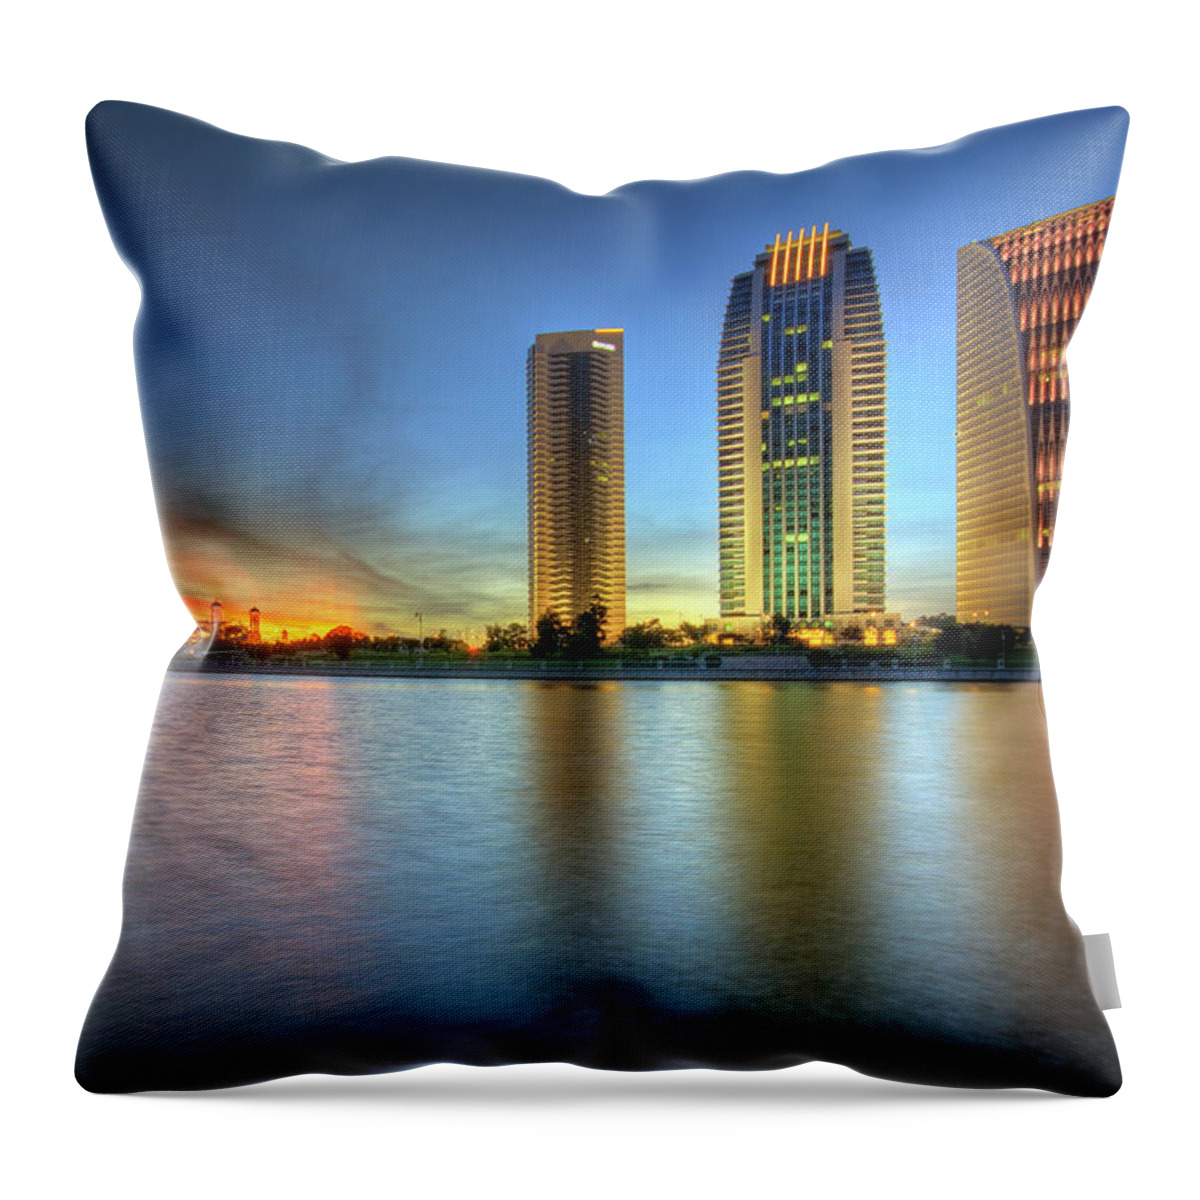 Tranquility Throw Pillow featuring the photograph Putrajaya Government Building by Nazarudin Wijee